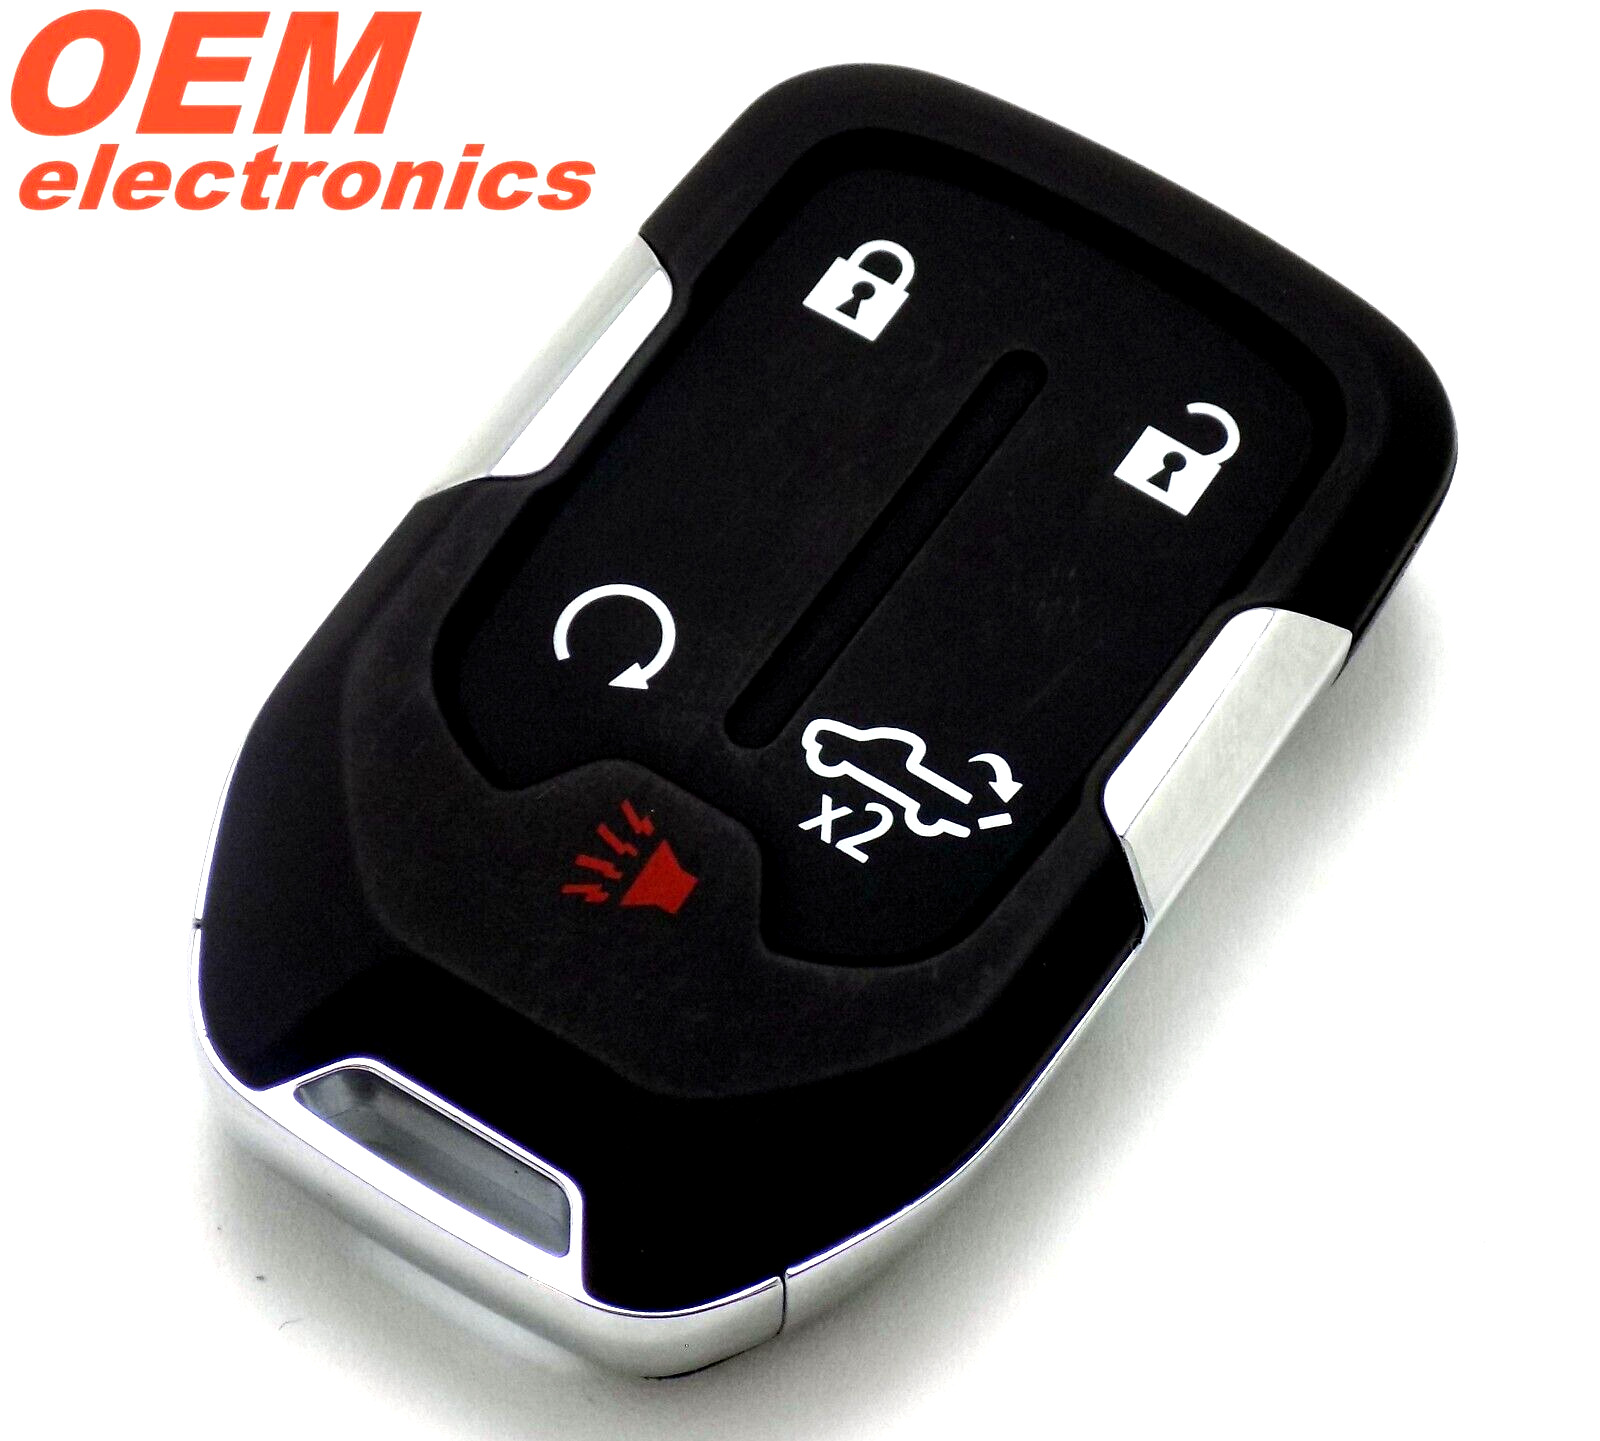 OEM ELECTRONIC 5 BUTTON REMOTE KEY FOB FOR 2019-2021 GMC SIERRA 1500 2500 3500